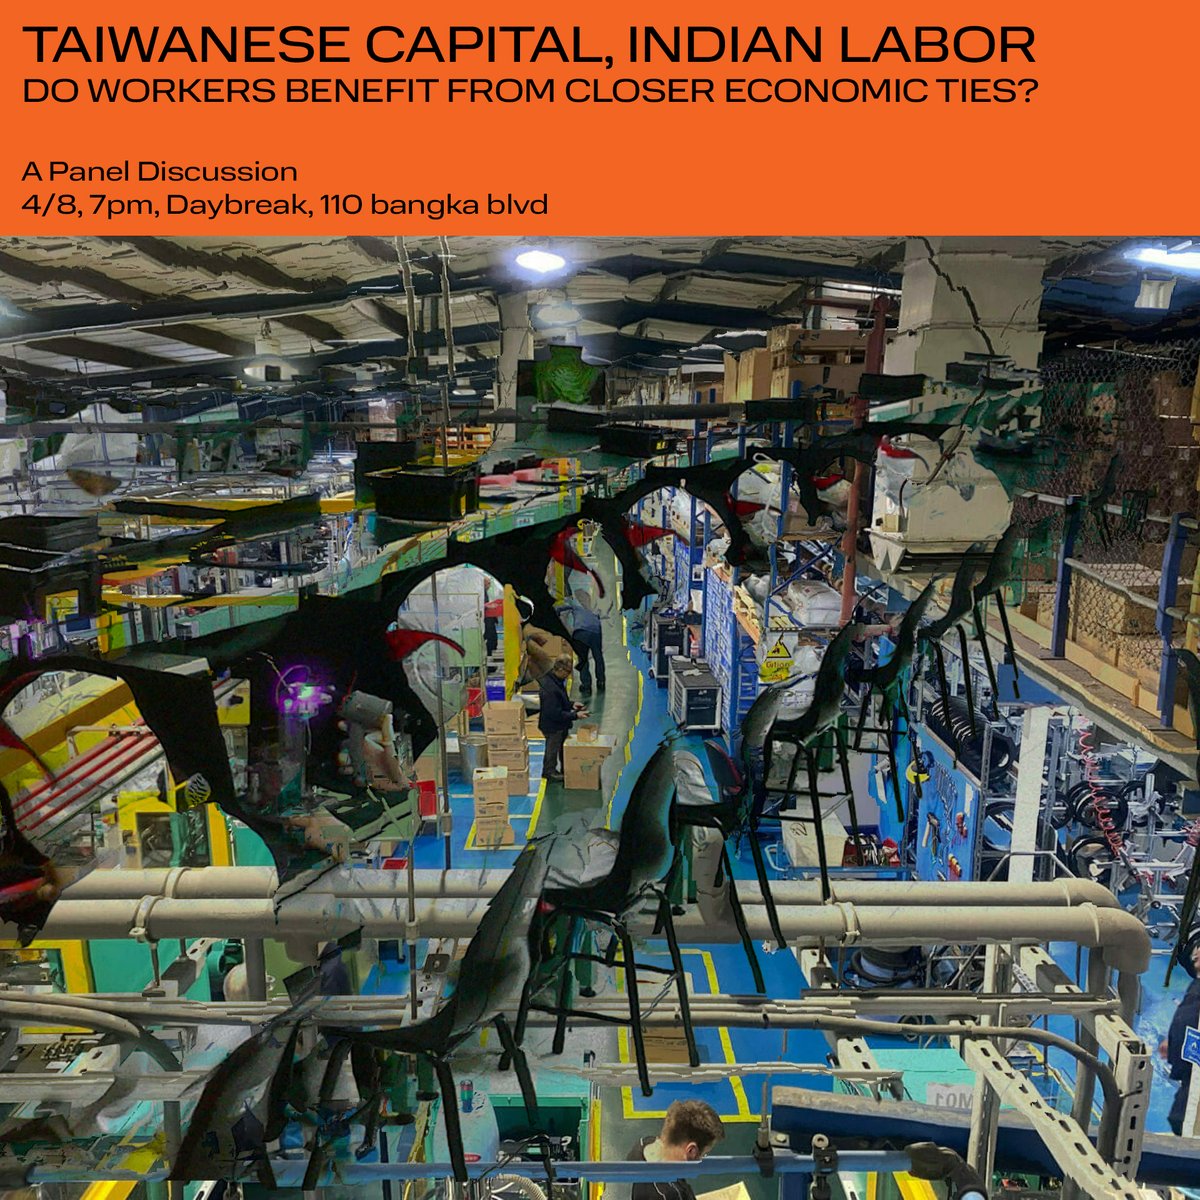 Next week! Taiwan and India are steadily pursuing closer economic and political relations through frameworks like Taiwan's New Southbound Policy. What are the impacts of these developments on workers in both places? facebook.com/events/7309072…